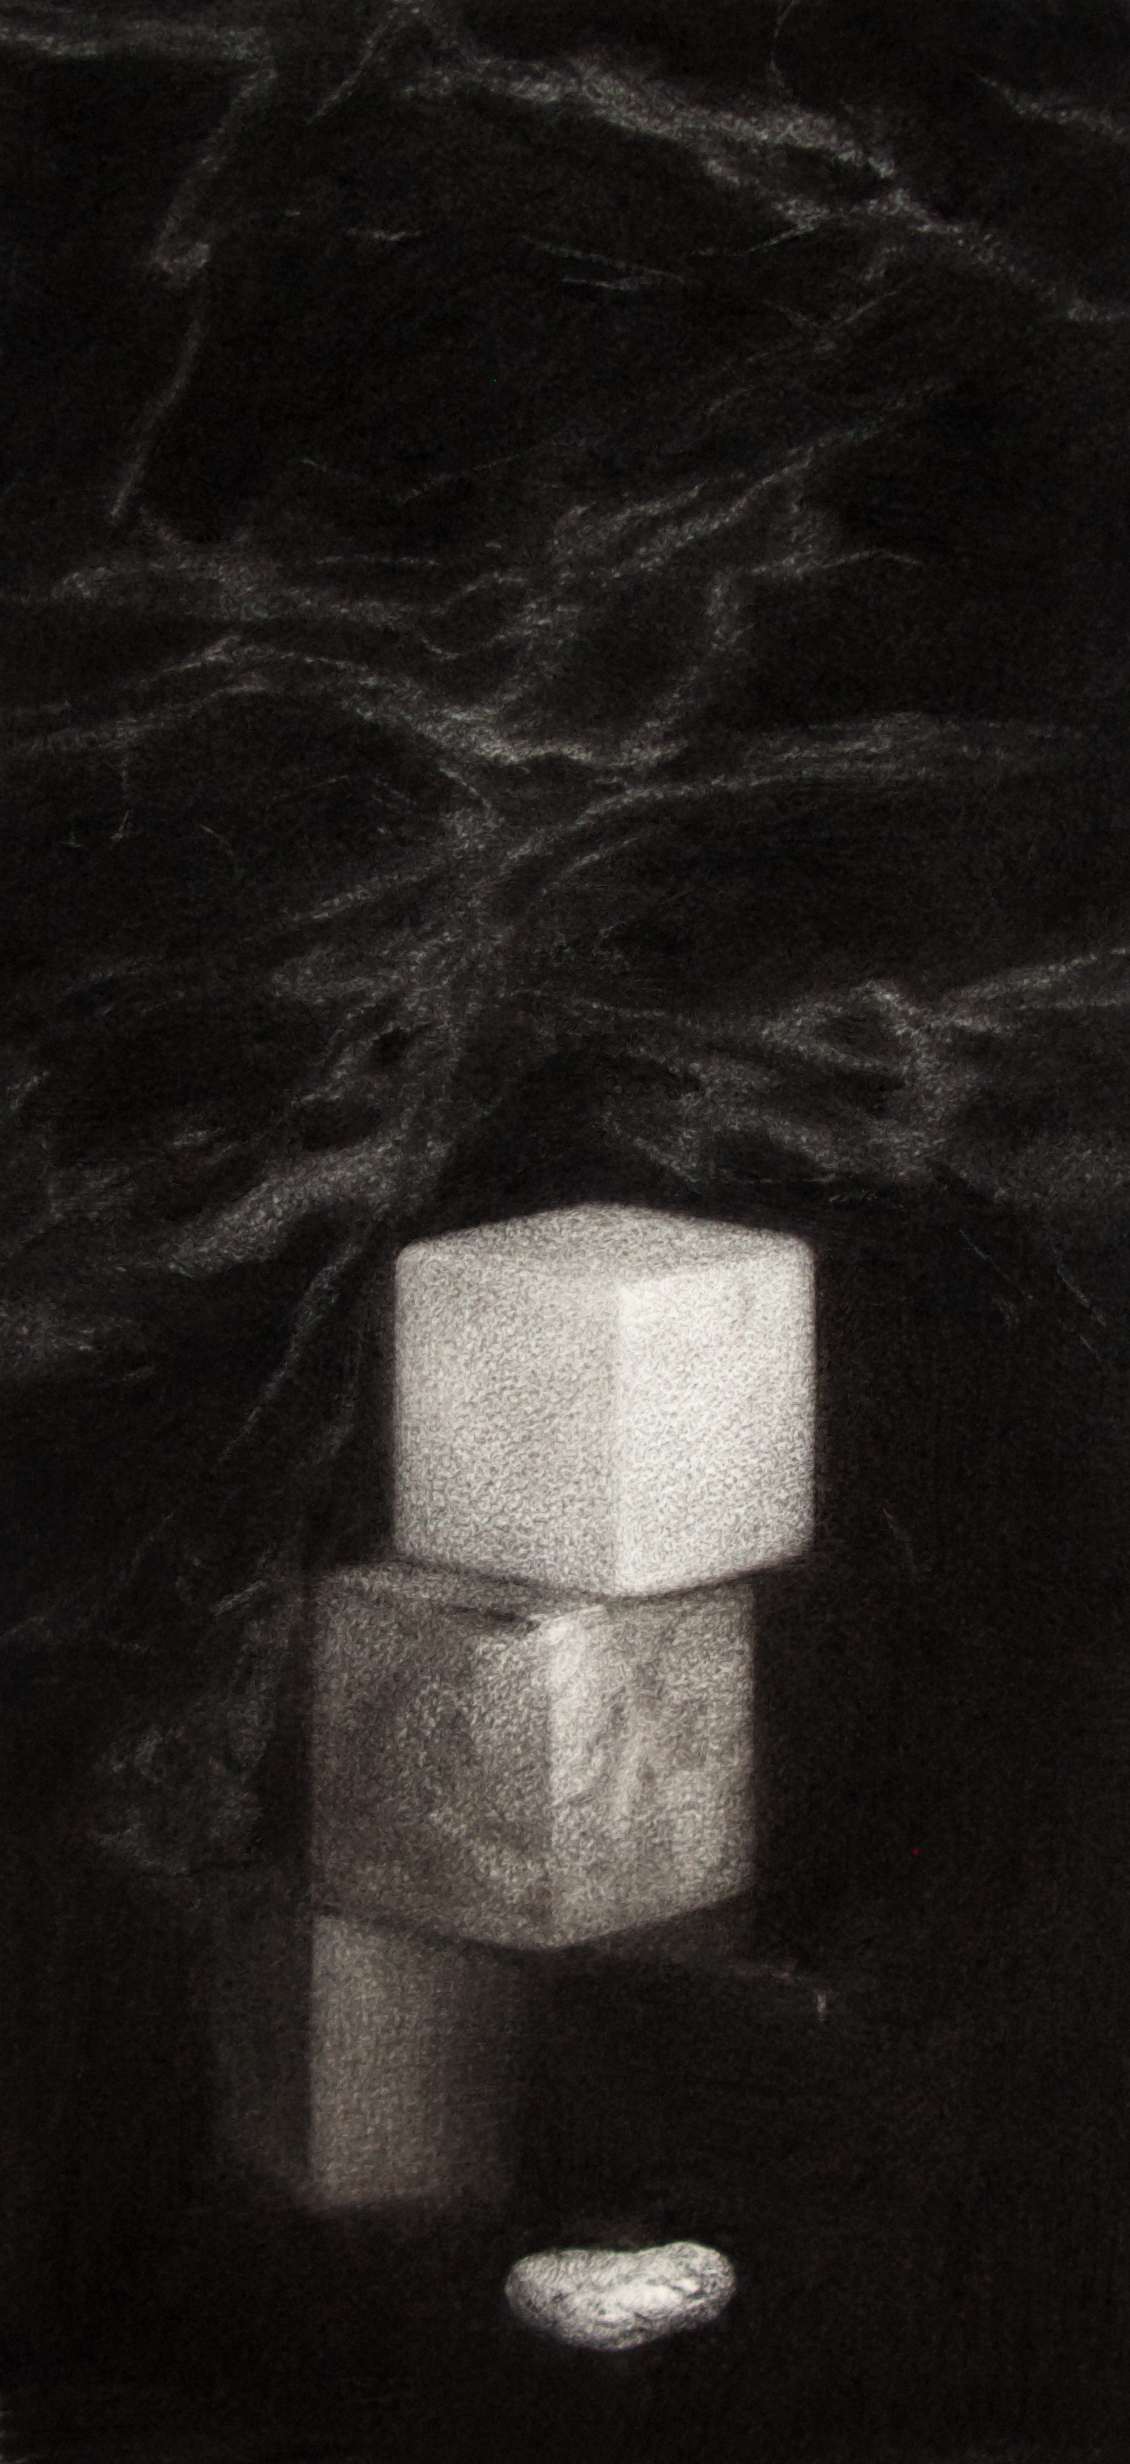   Solids  2017 charcoal on paper, 19cm by 48cm 